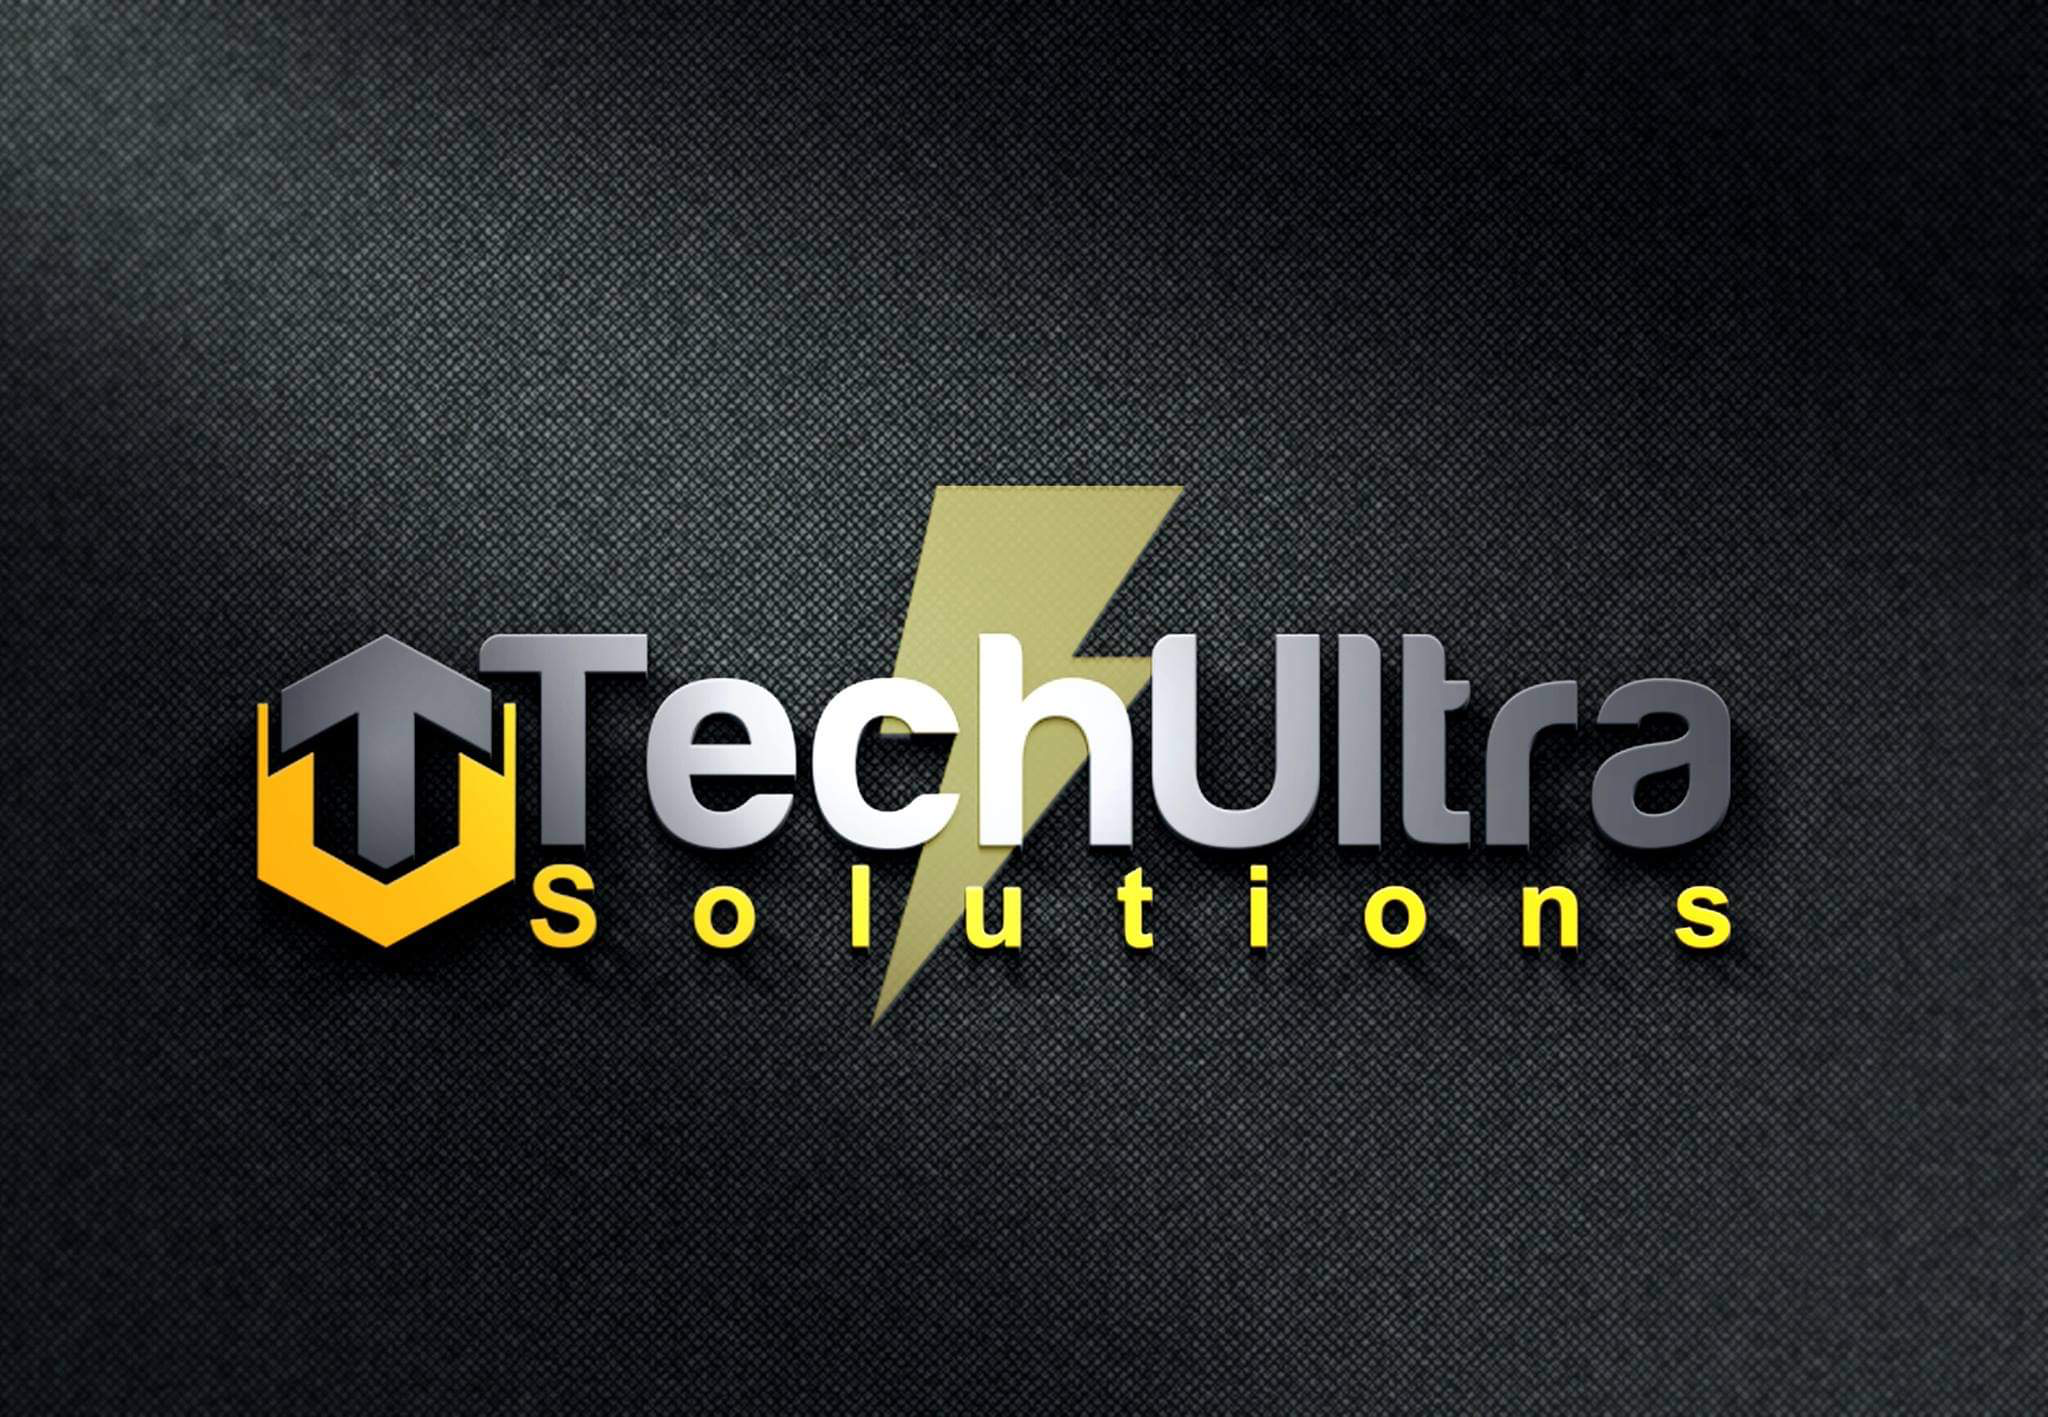 Techultra Solutions , Techultra Solutions